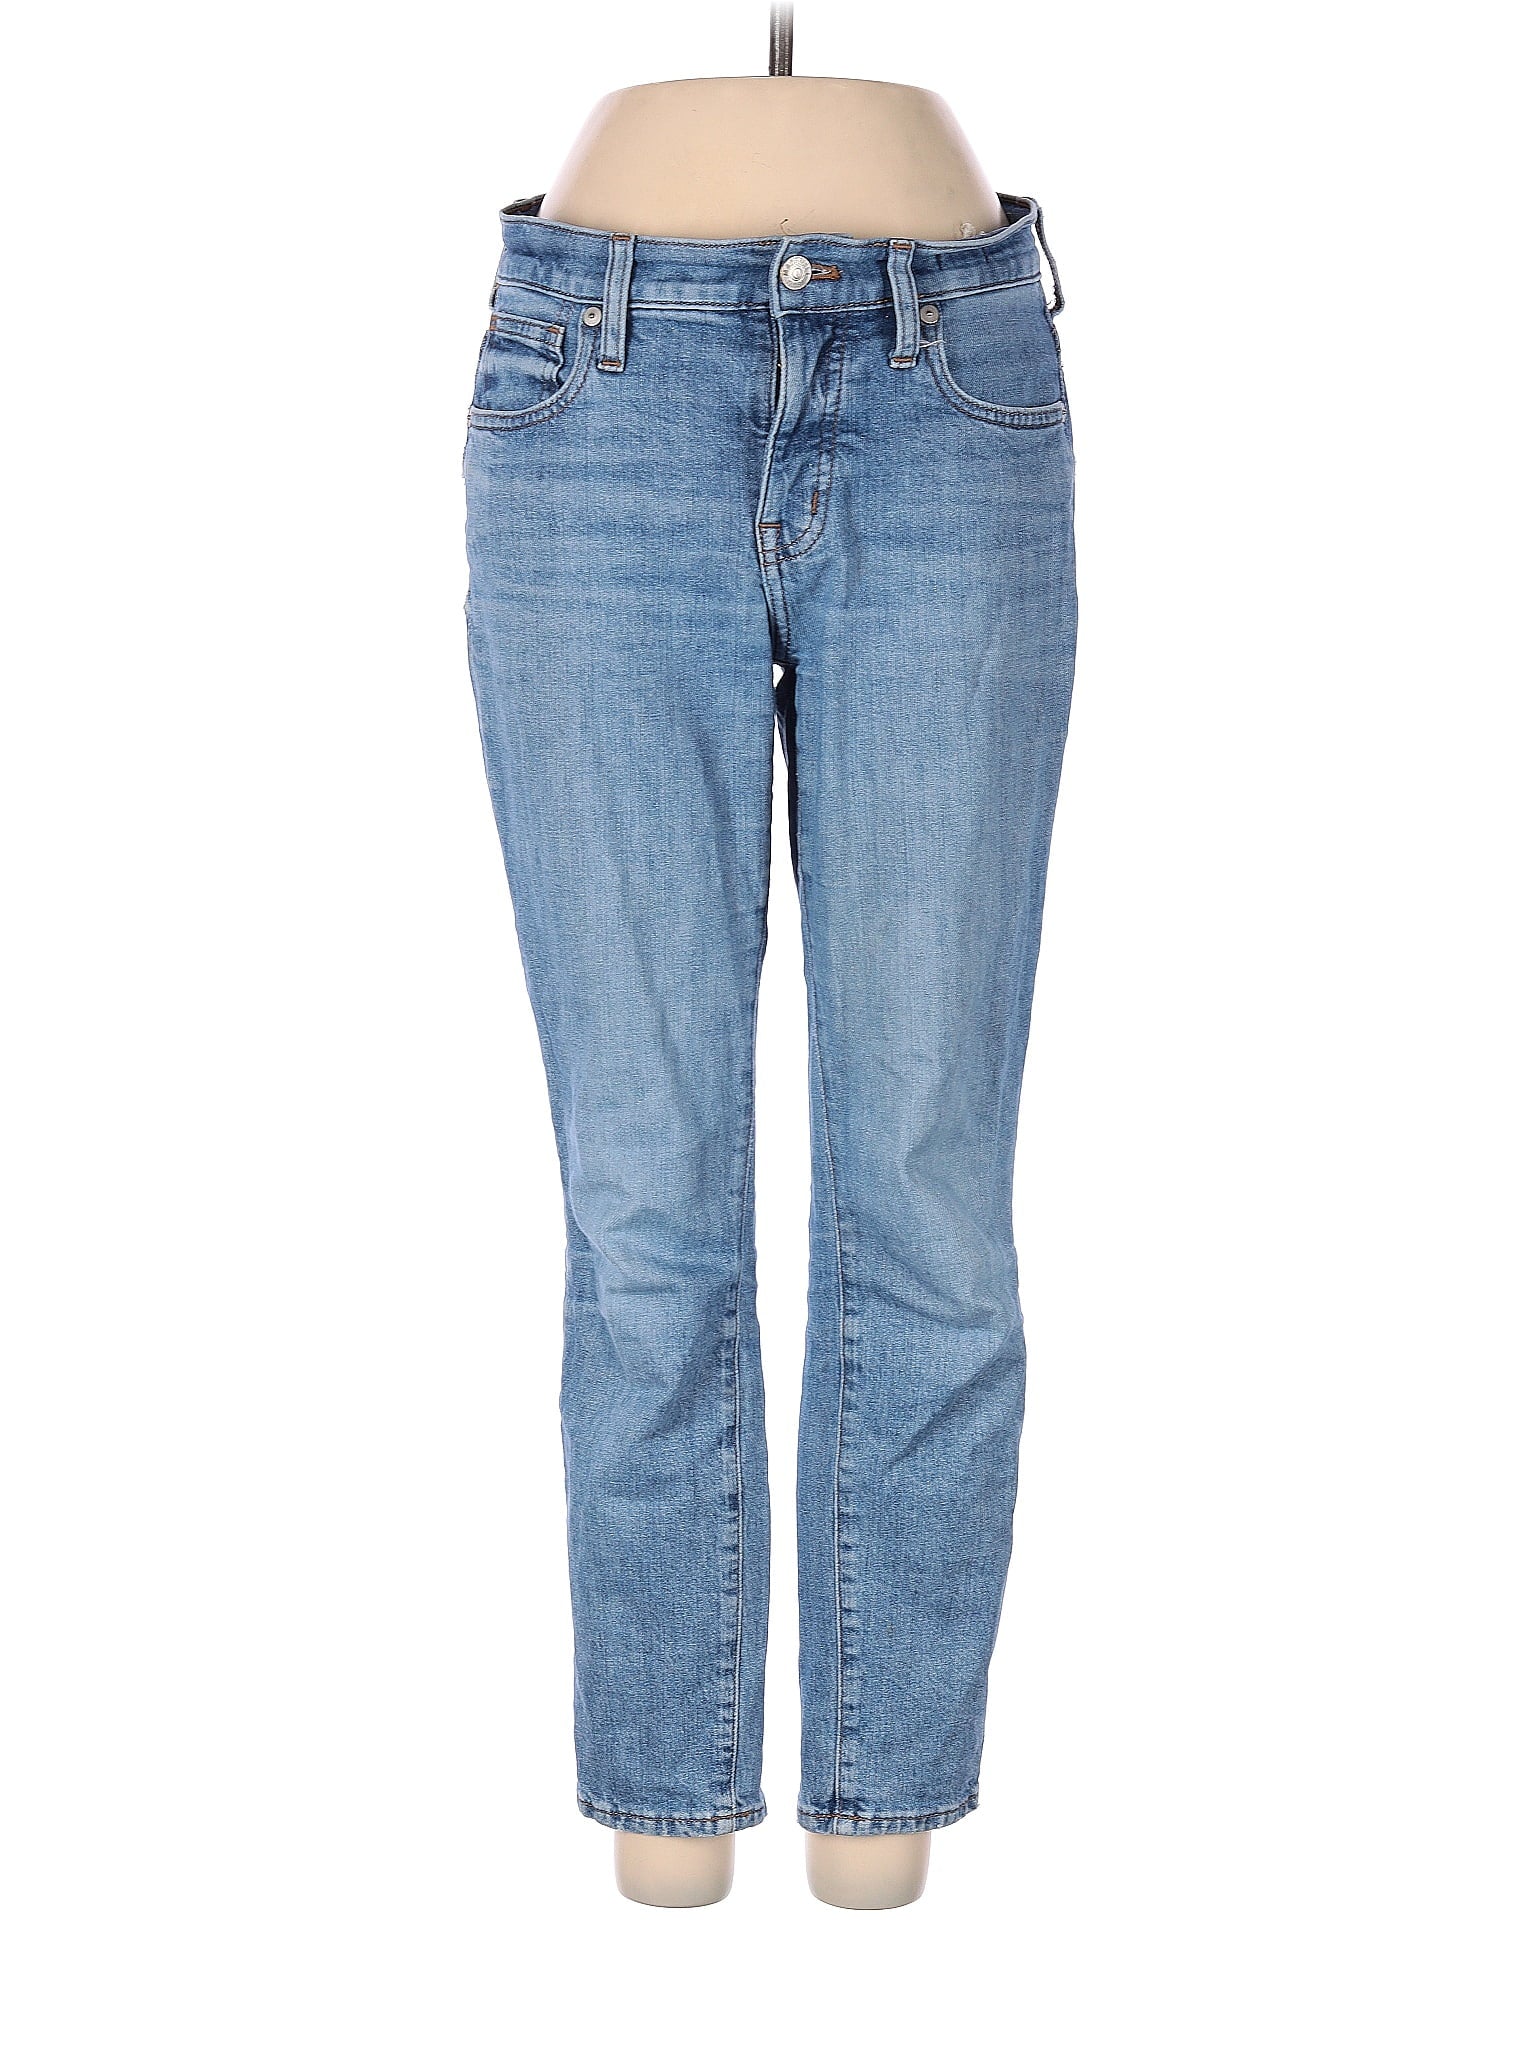 Mid Rise Petite Jeans for Women